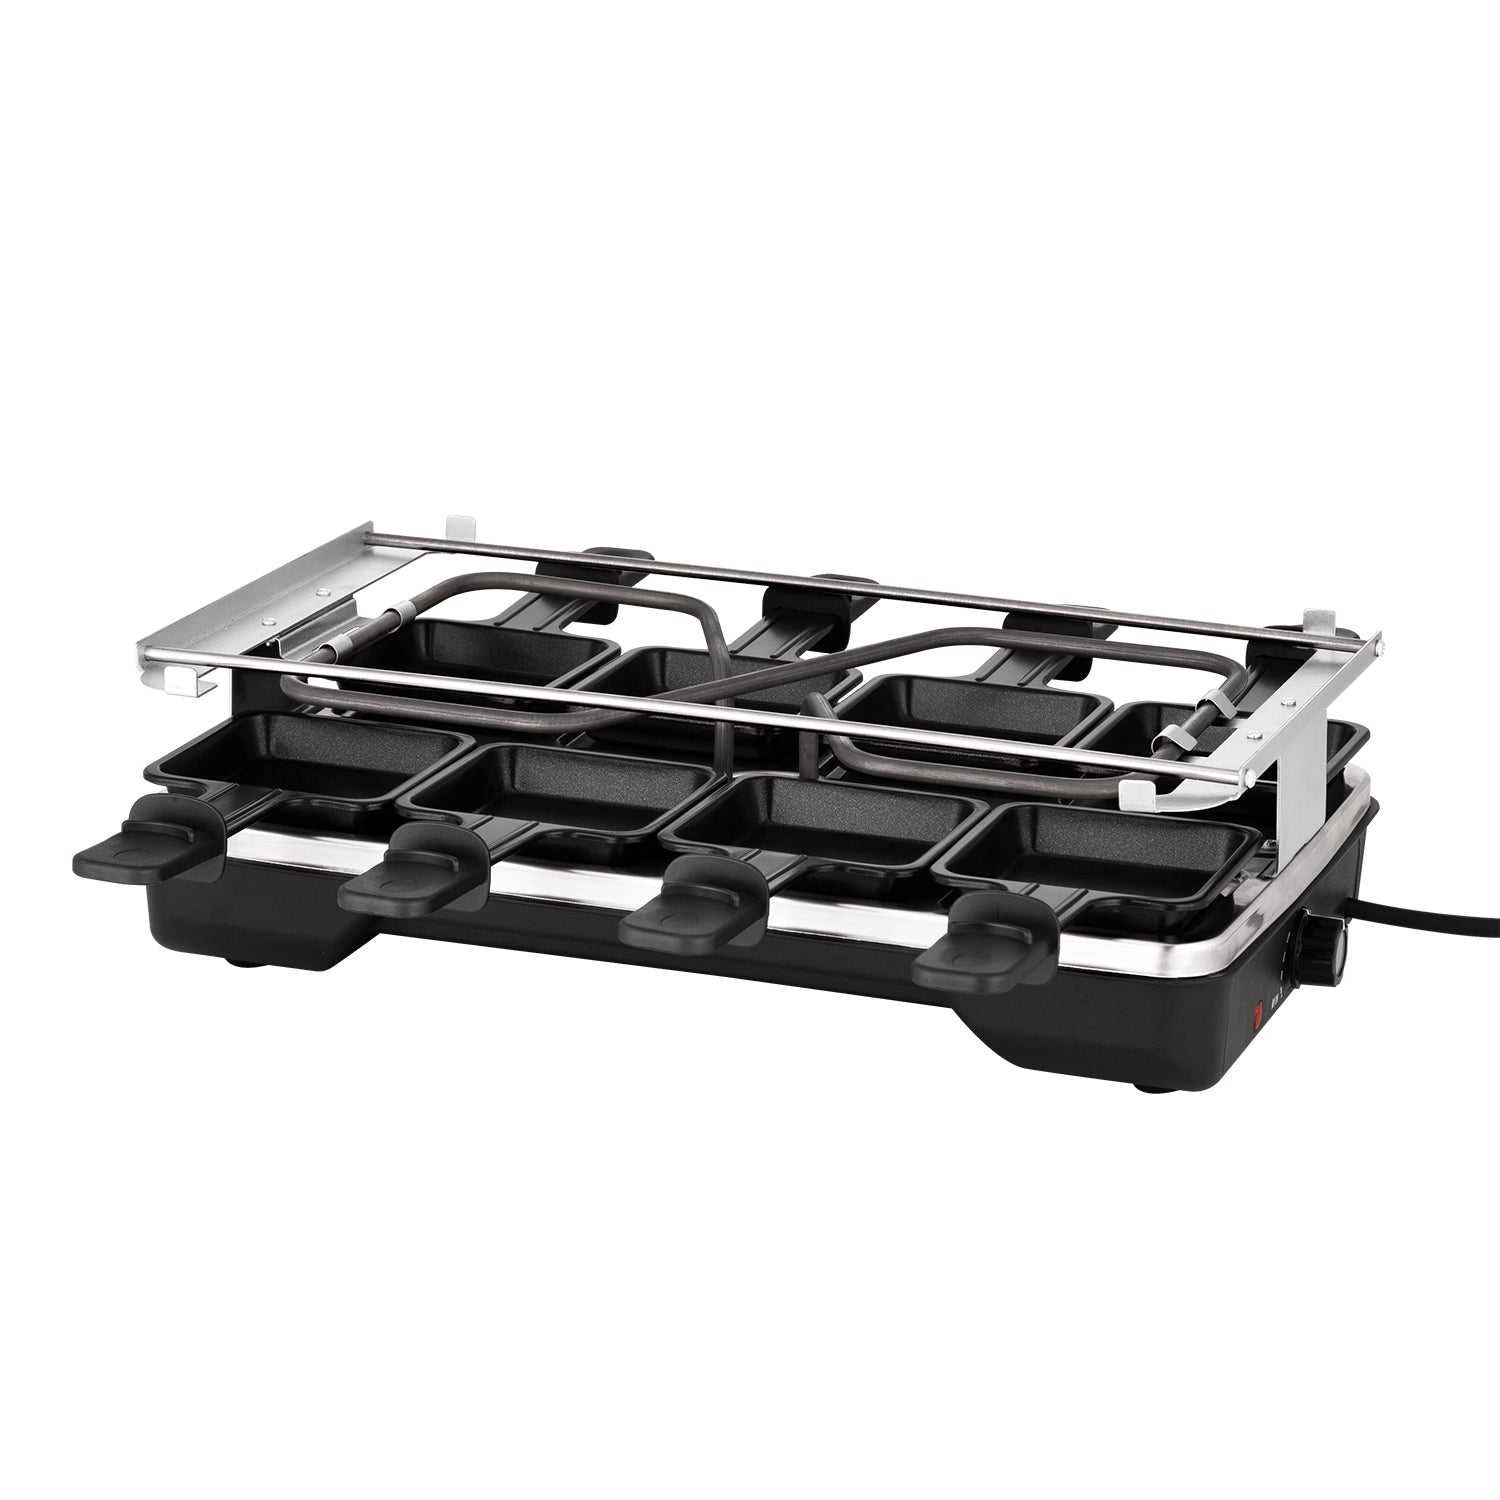 Electric griddle